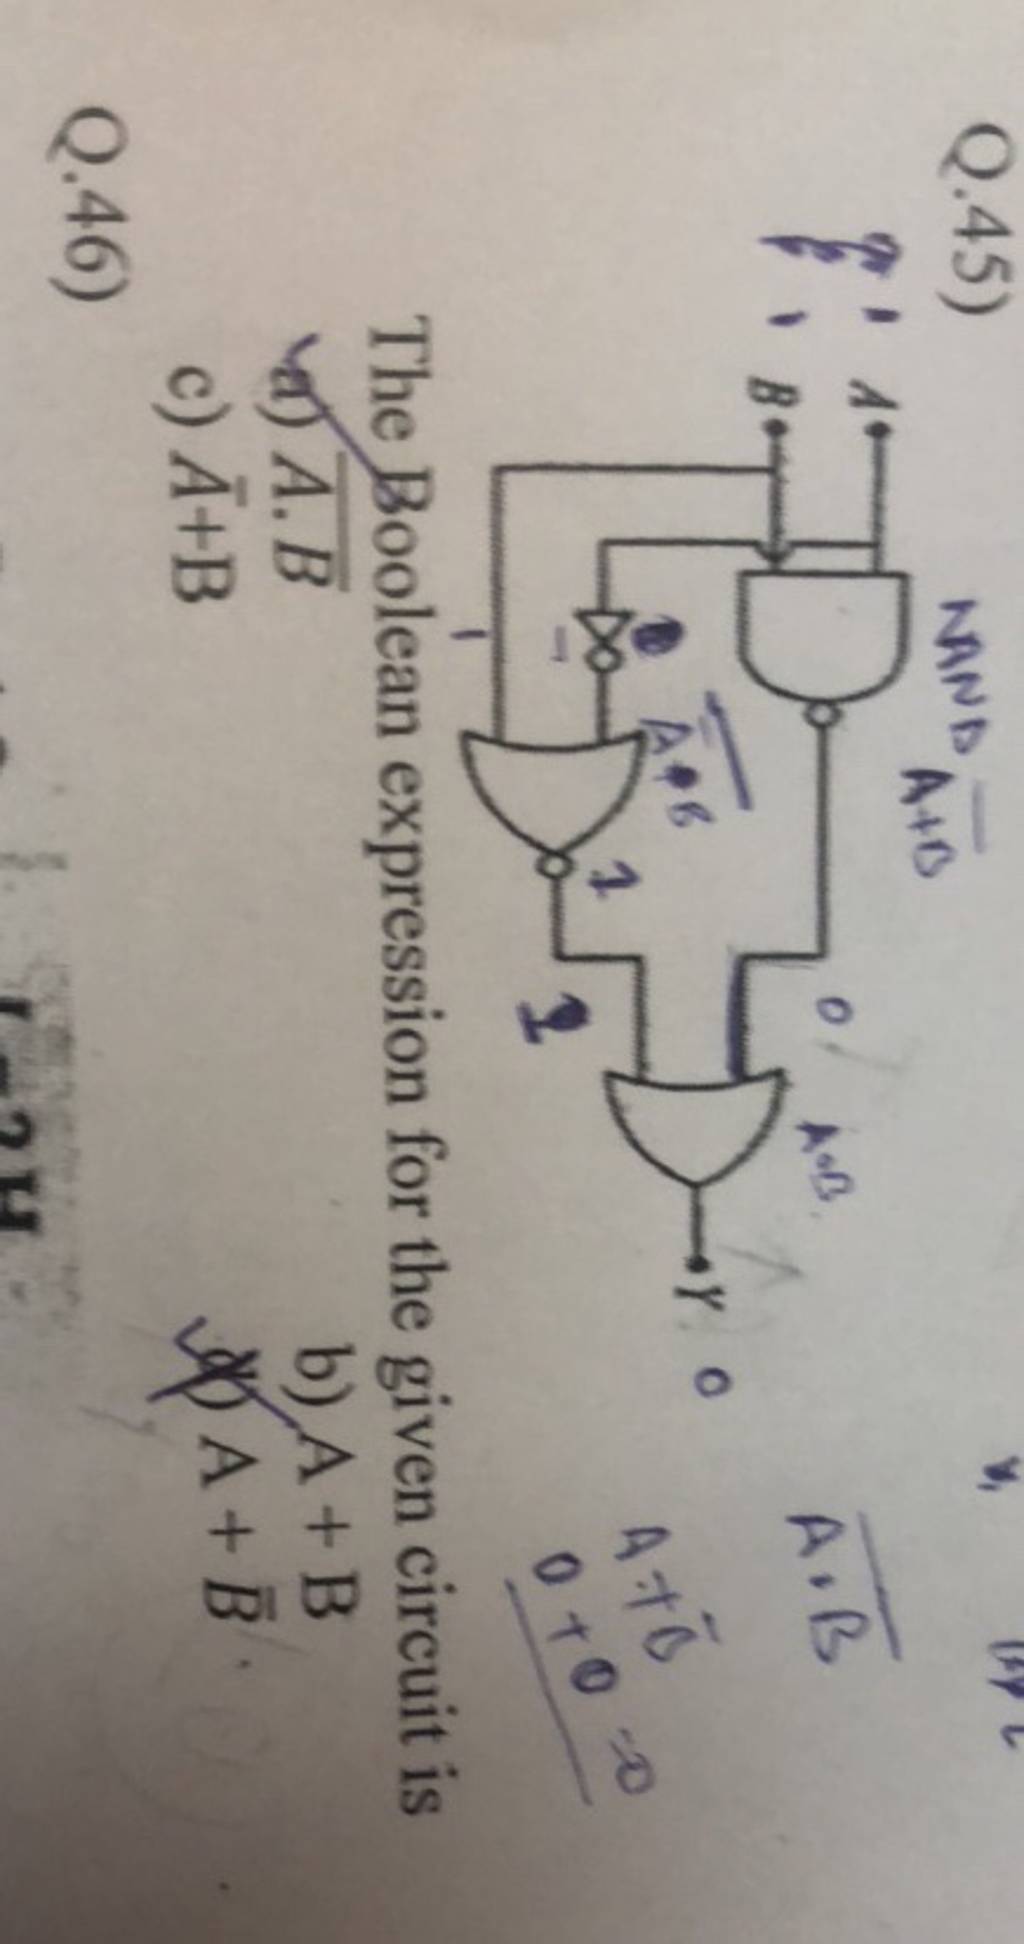 Q.45)
The Boolean expression for the given circuit is
v) A⋅B
b) A+B
c)